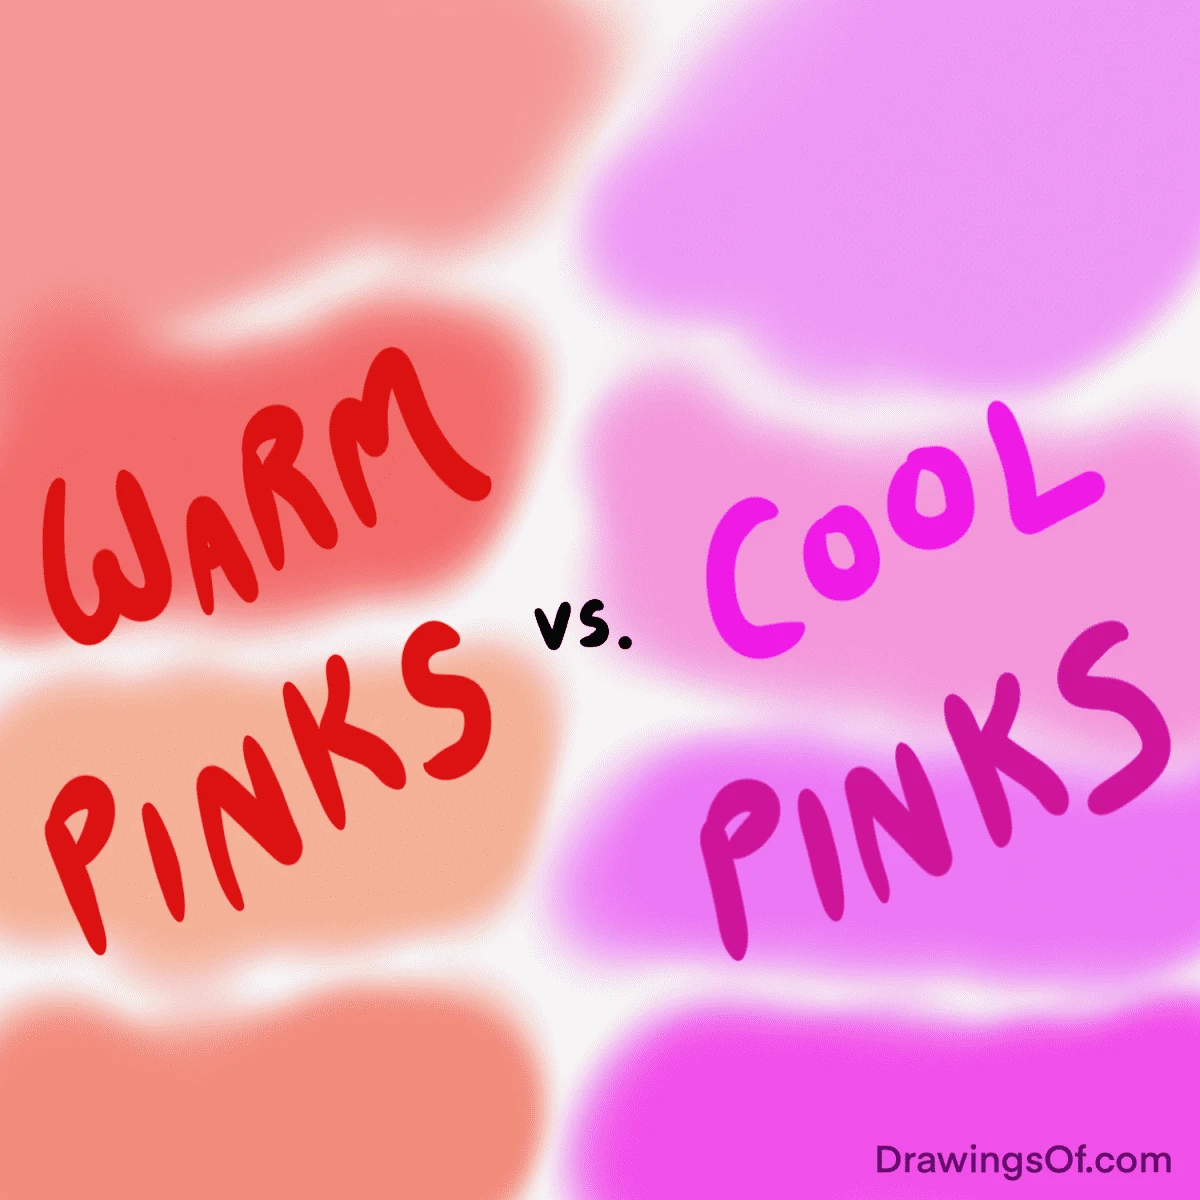 Pink is a cool color OR warm color!